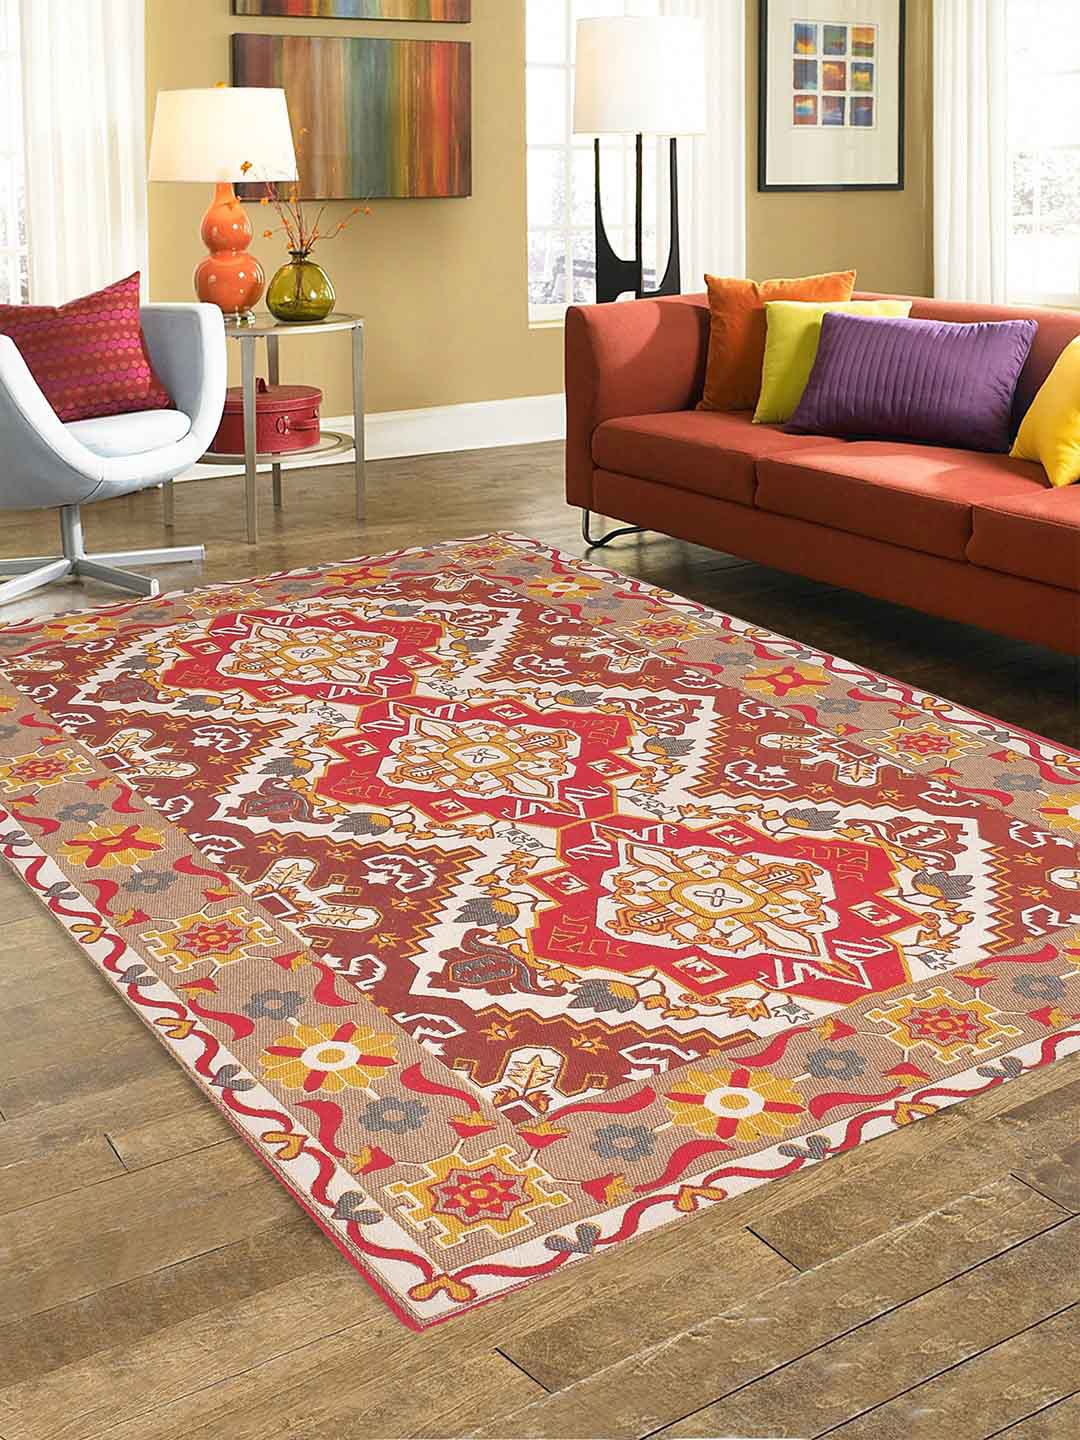 BLANC9 Red & Off White Printed Cotton Carpet Price in India